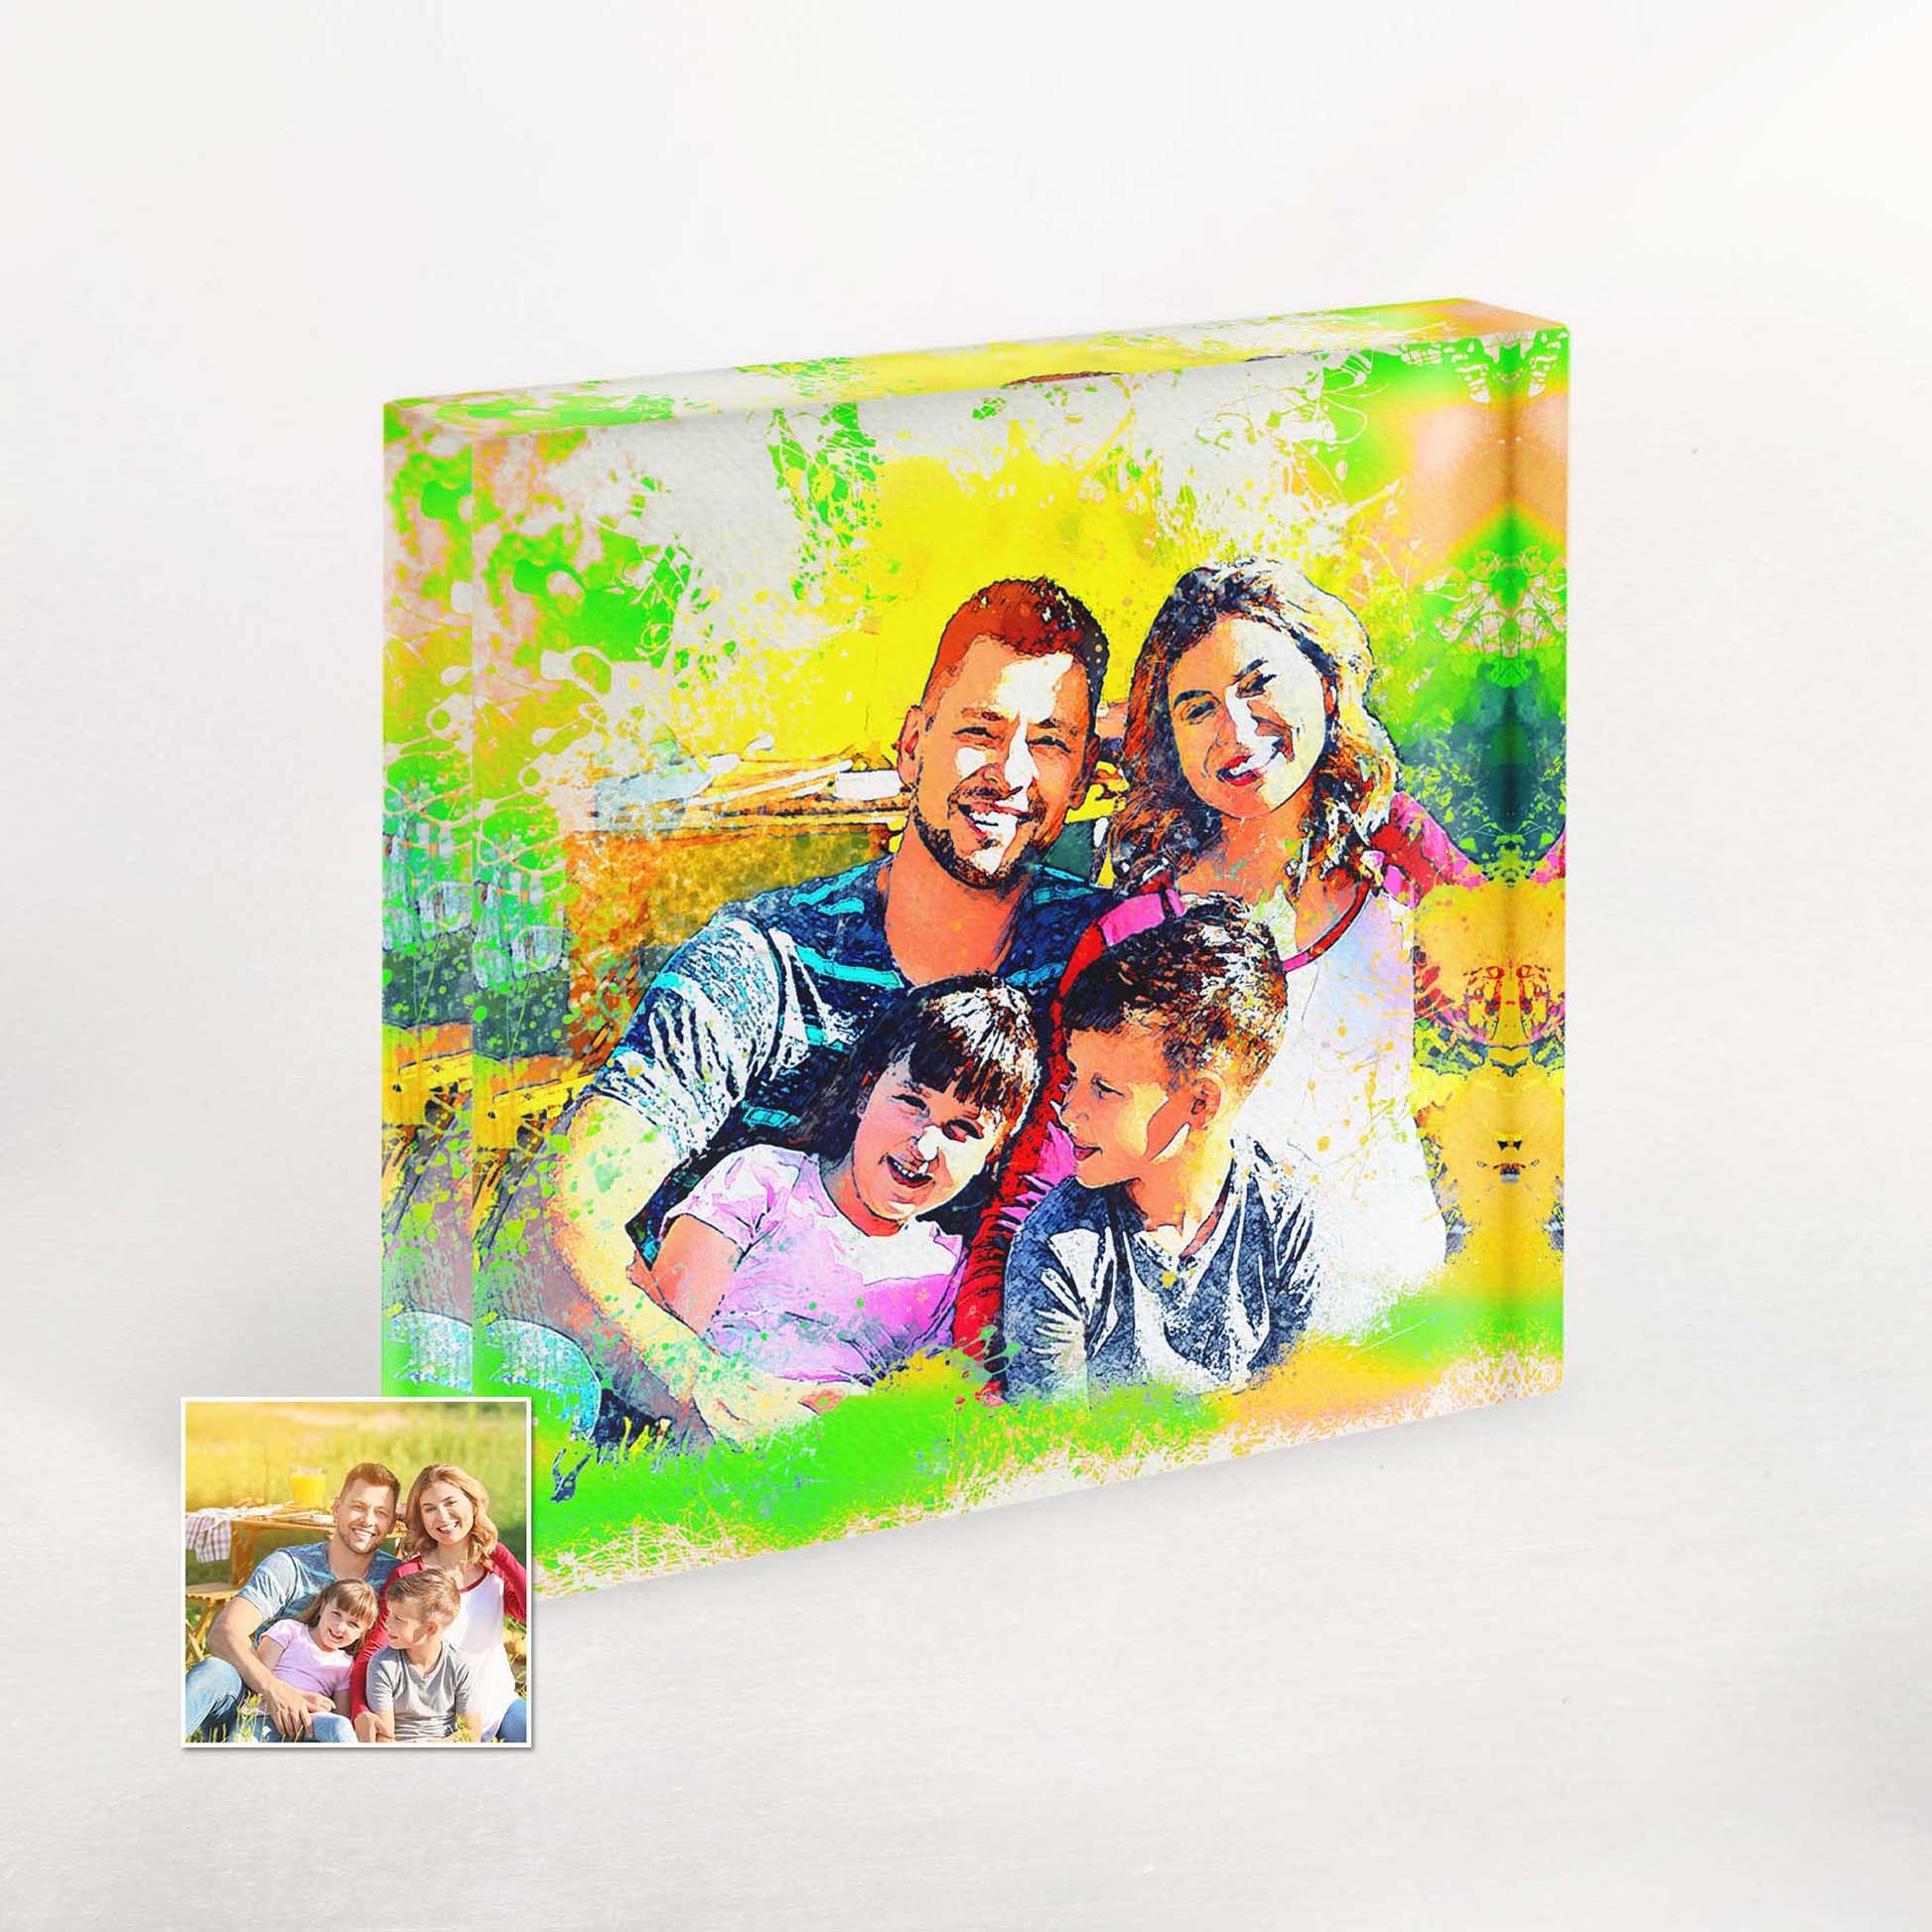 Make a statement with our Personalised Splash Watercolor Acrylic Block Photo. The captivating splash effect and personalized touch create a cool and creative piece of art that inspires and uplifts